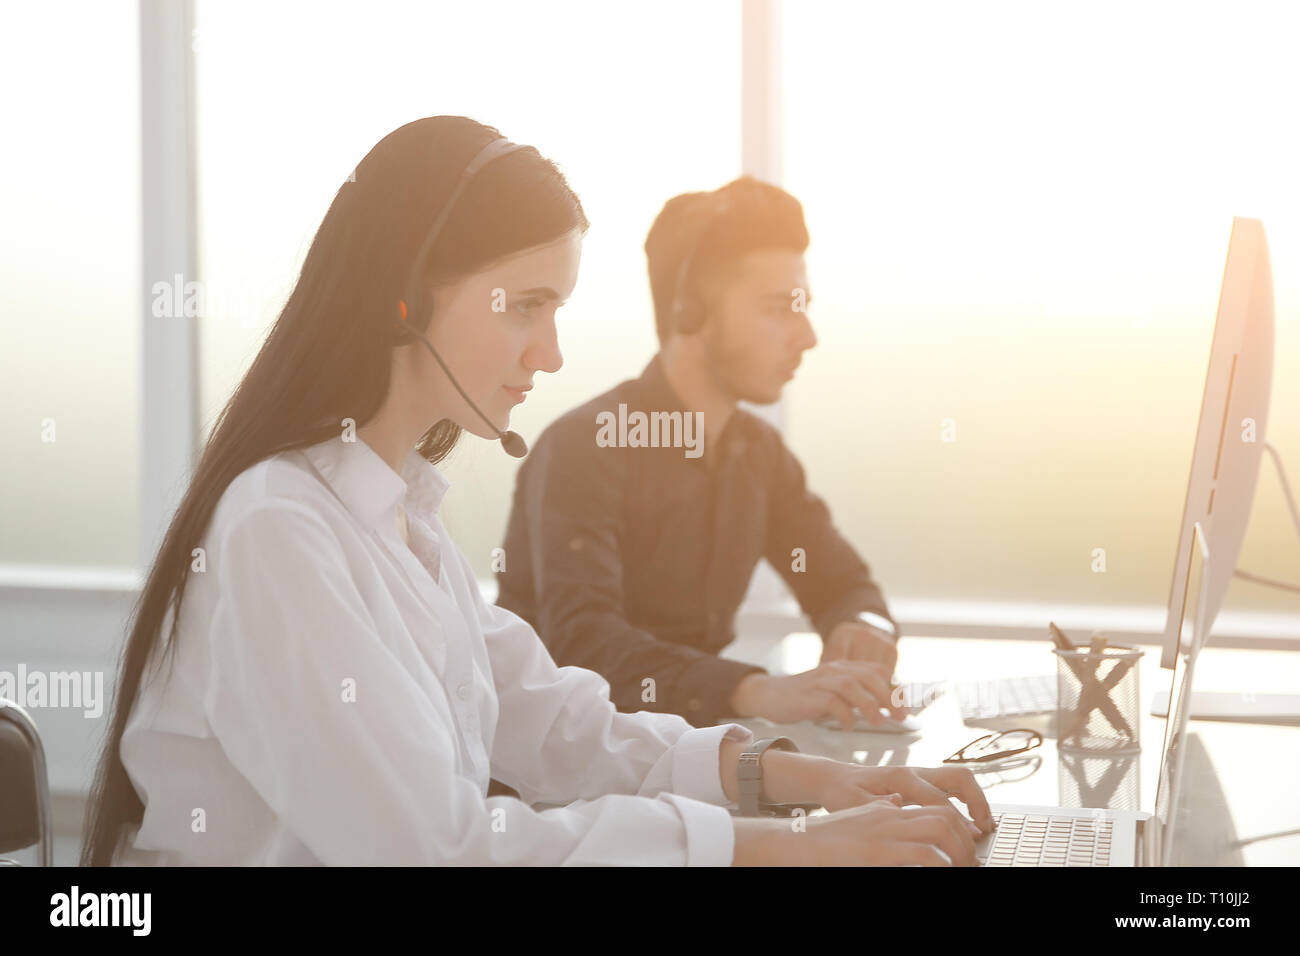 agent, customer service, working at the call center Stock Photo